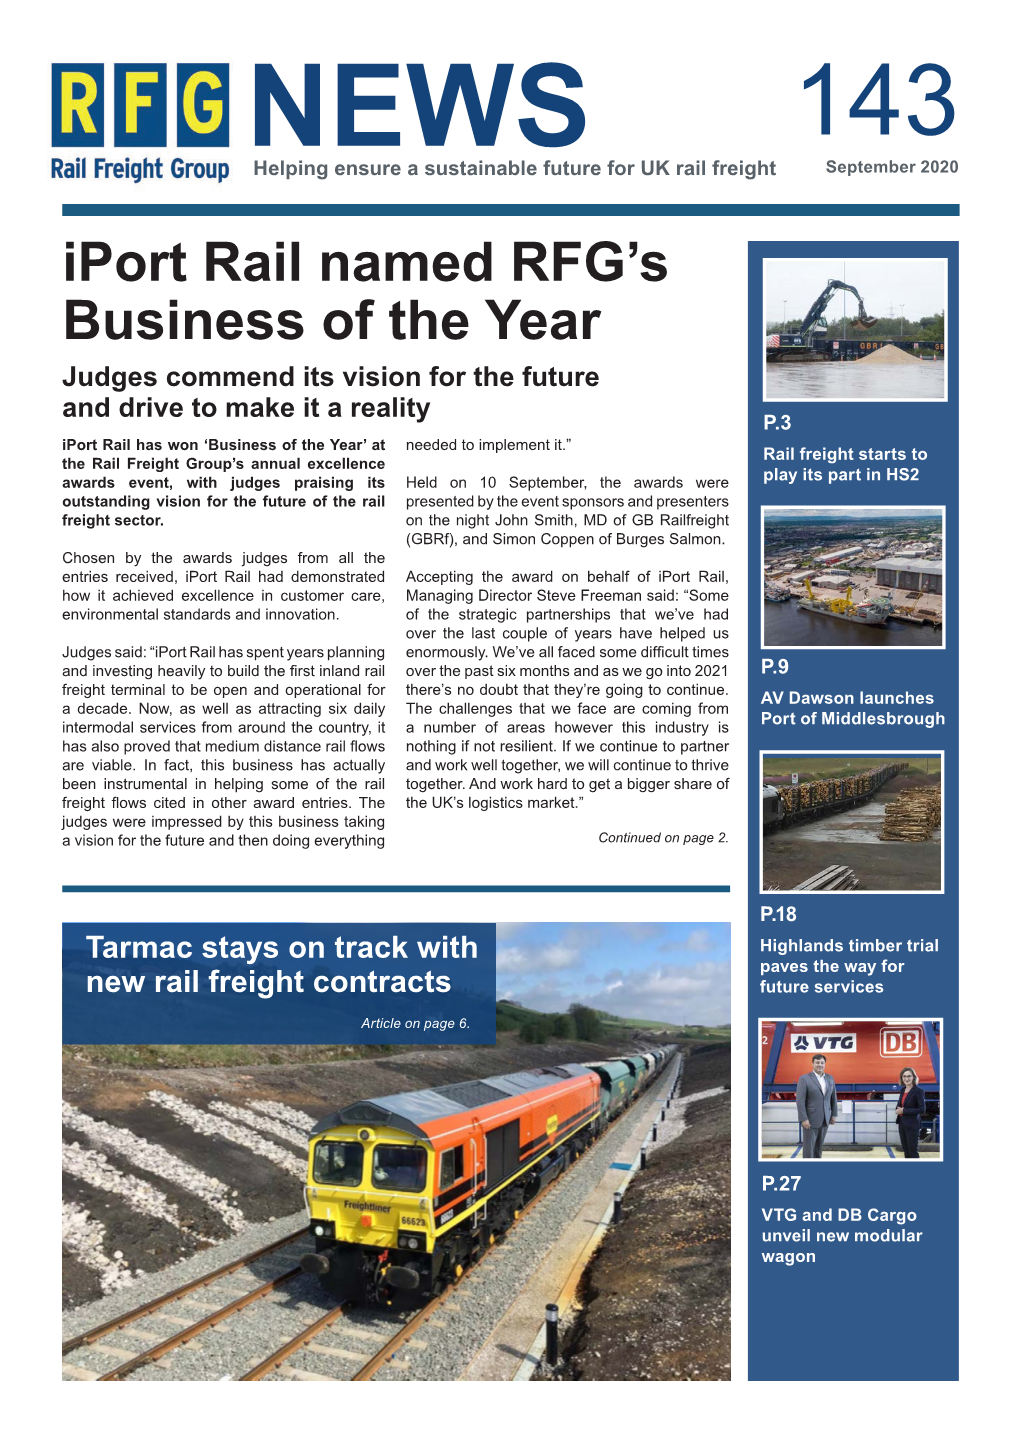 Iport Rail Named RFG's Business of the Year